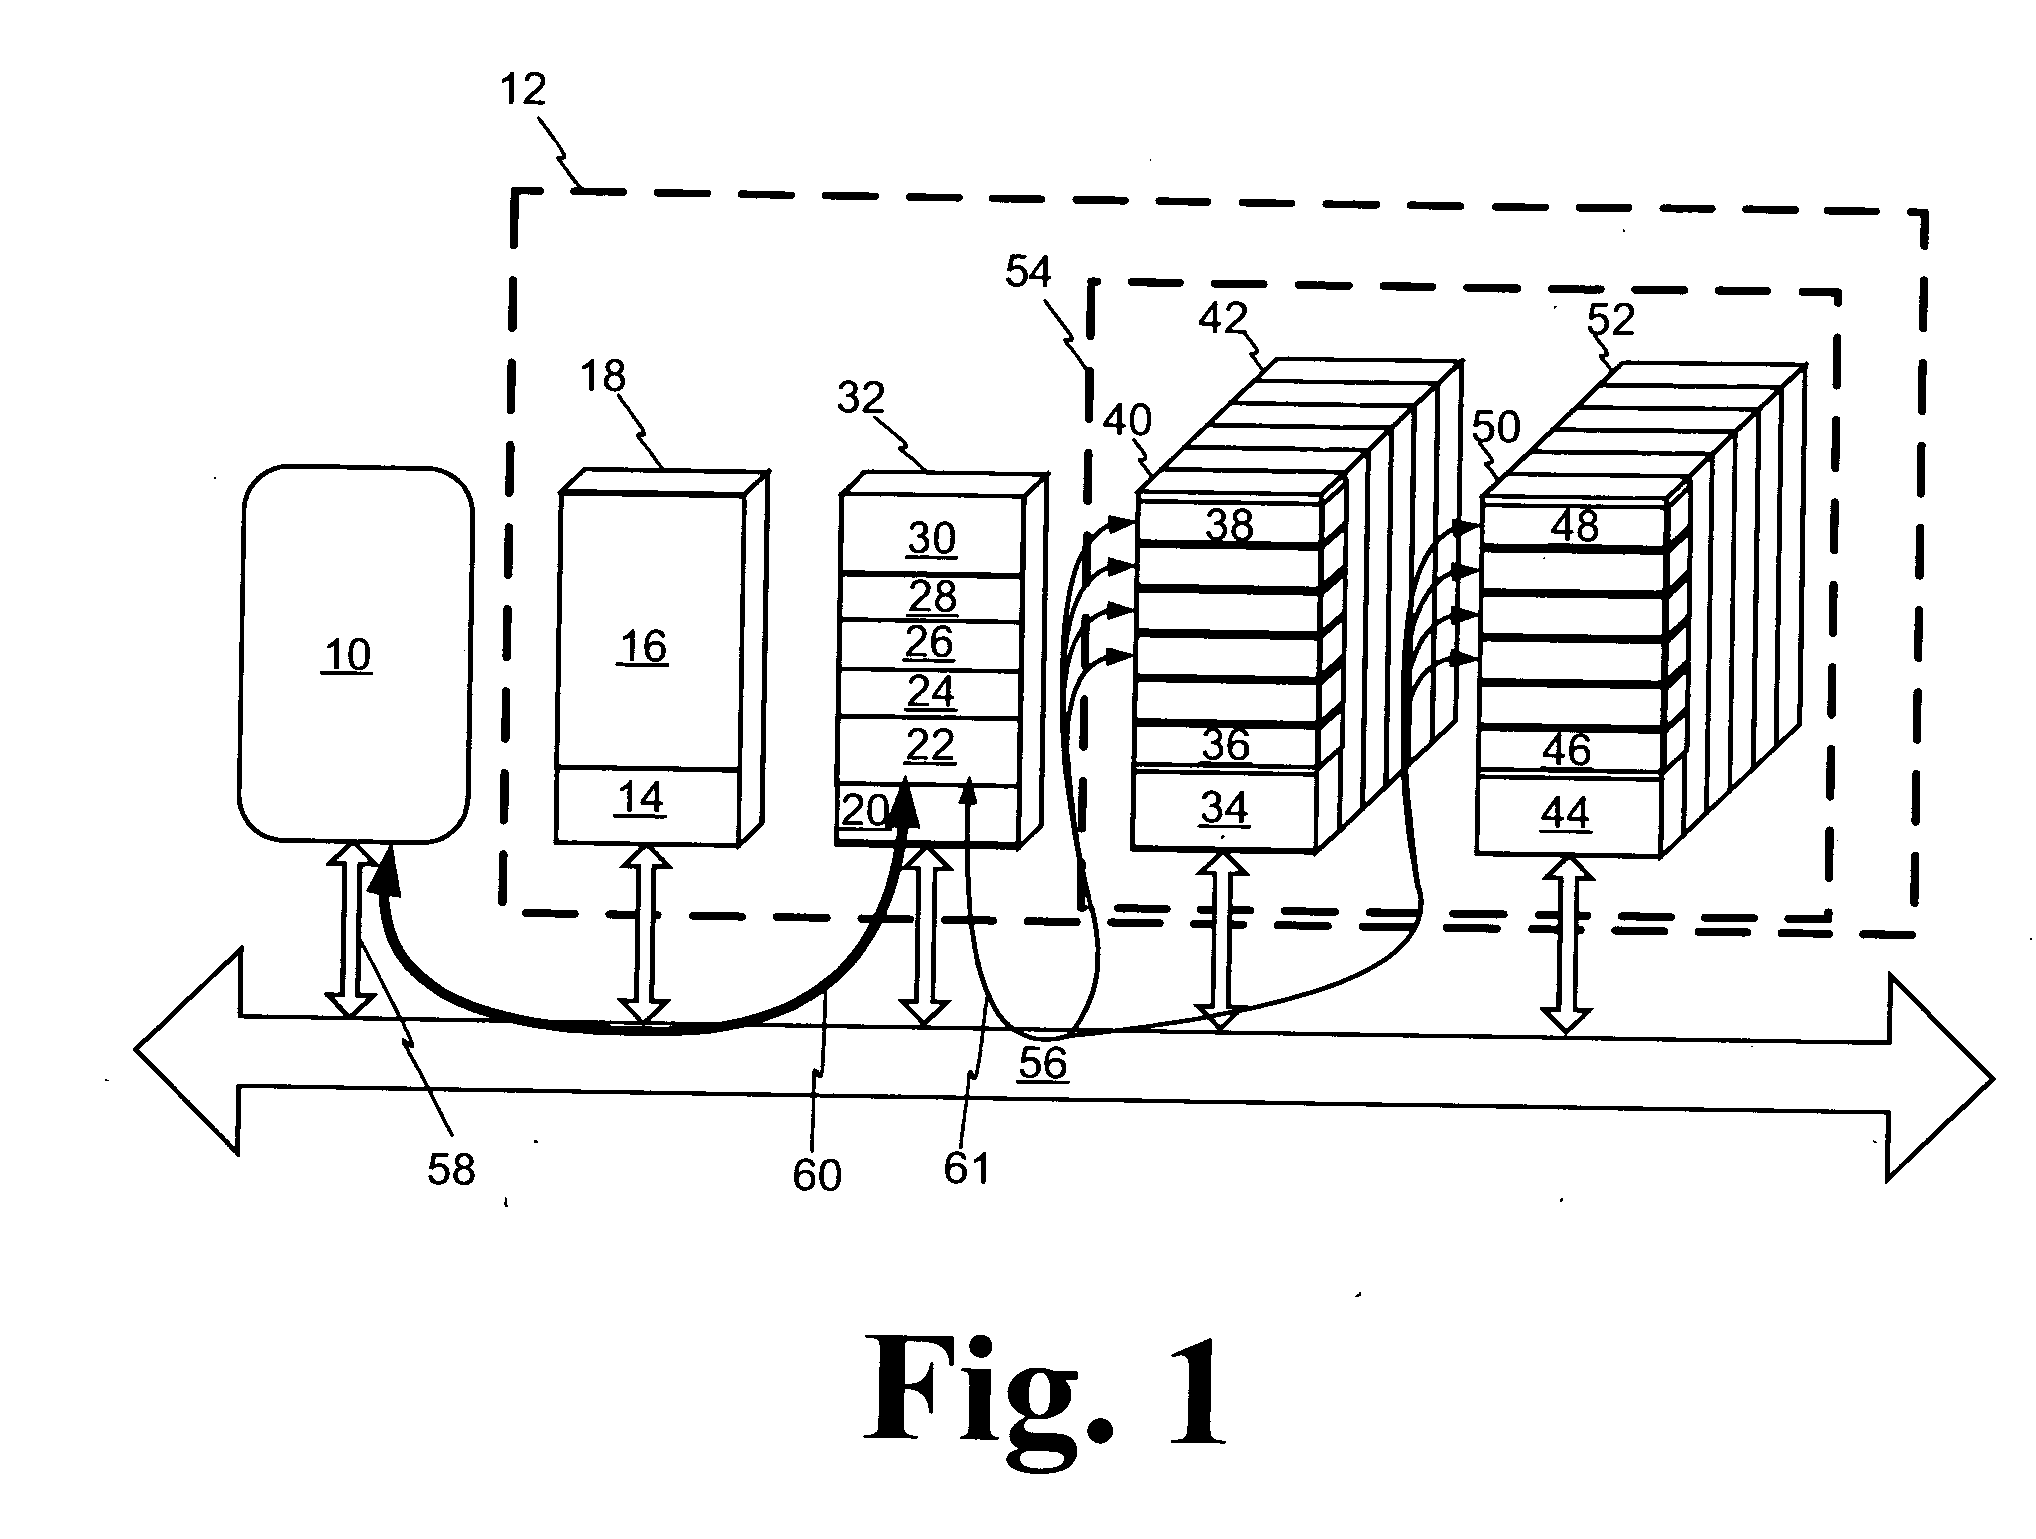 Distributed processing RAID system